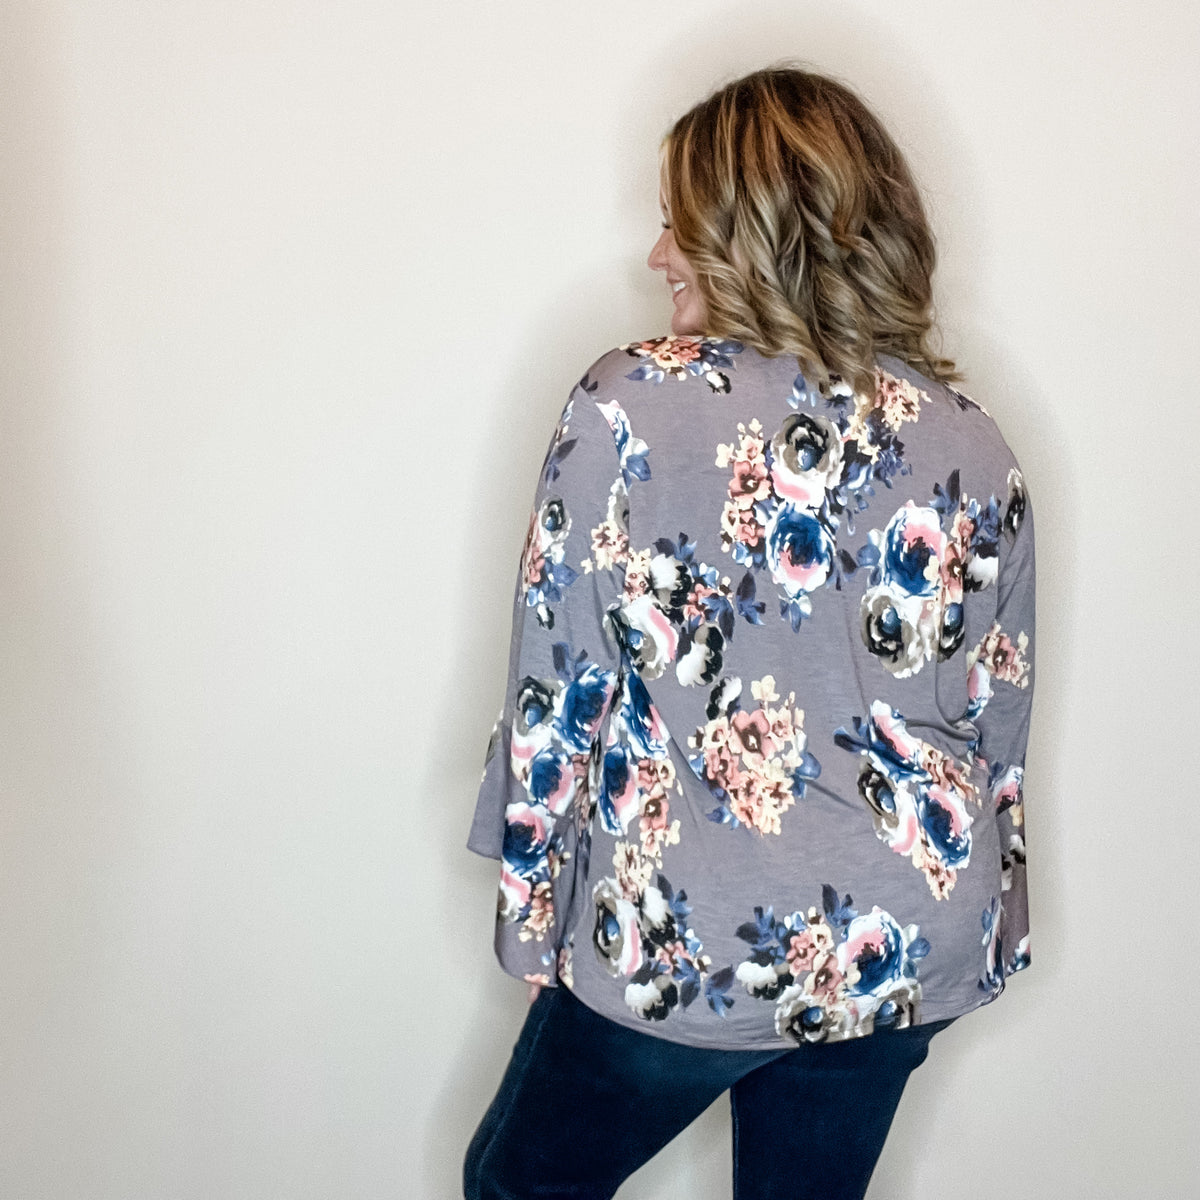 "Tough Enough" Floral Split Neck with Ruffle Sleeve